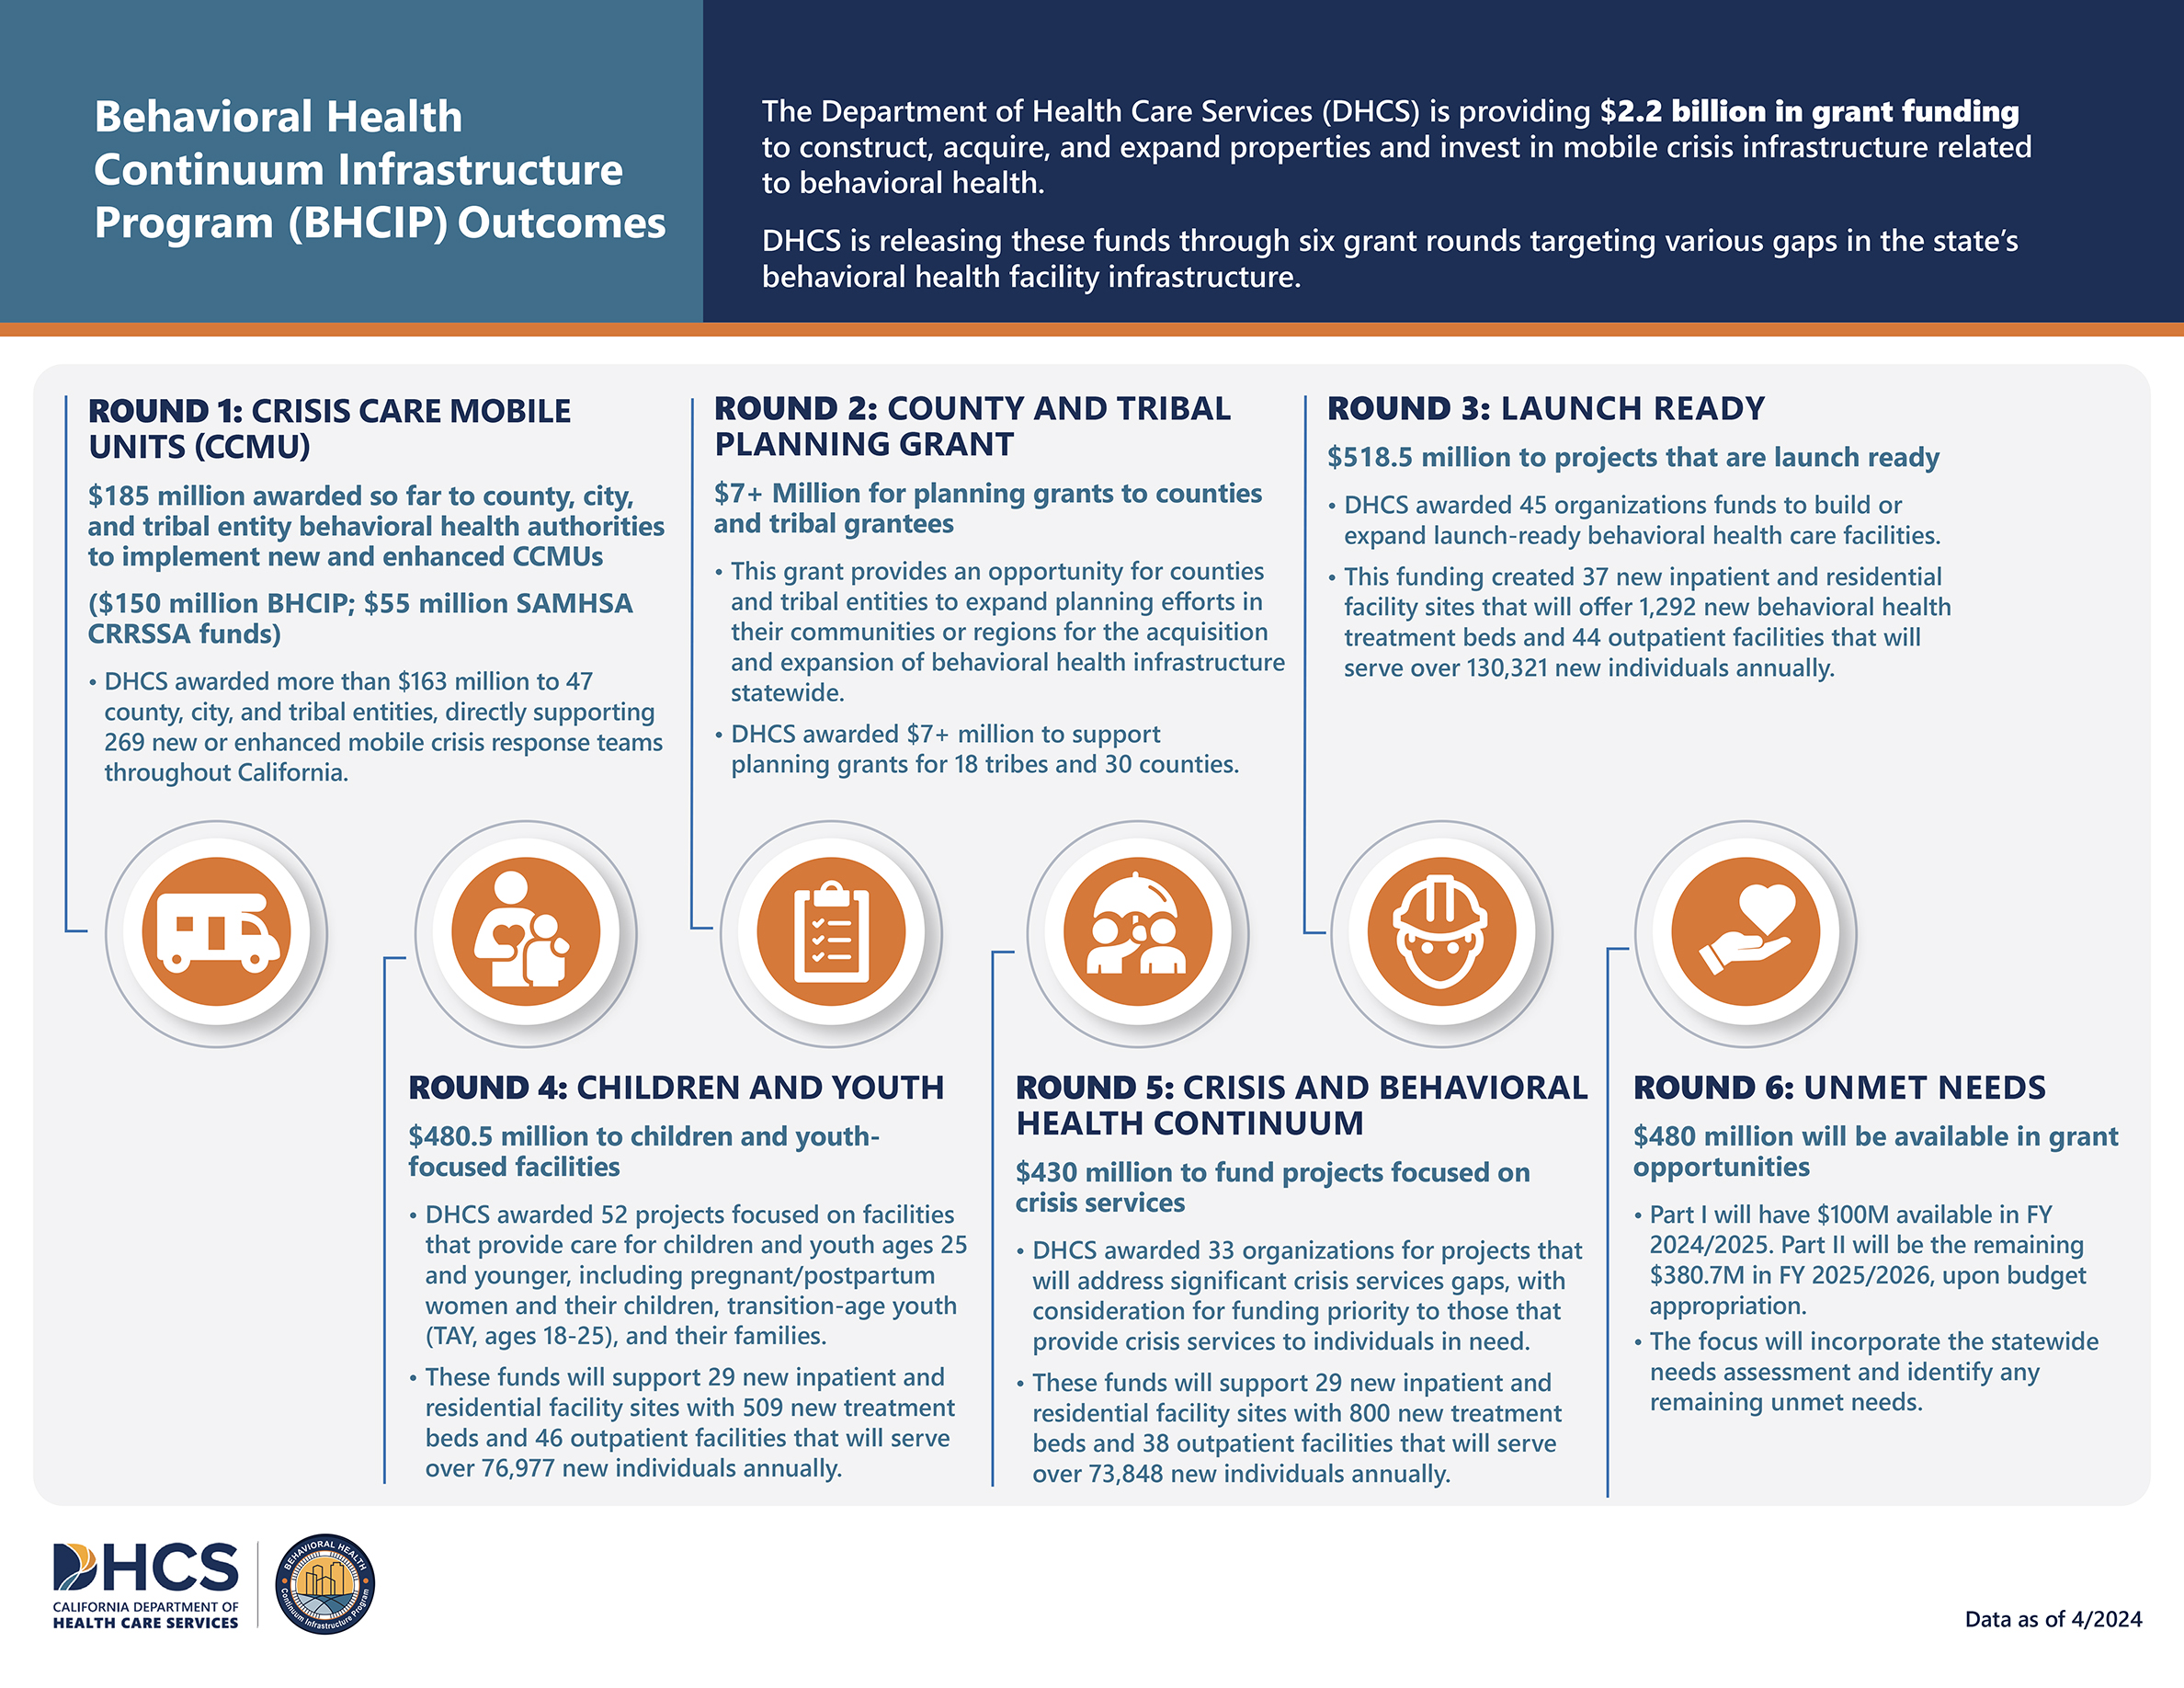 The Department of Health Care Services (DHCS) Outcomes Infographic